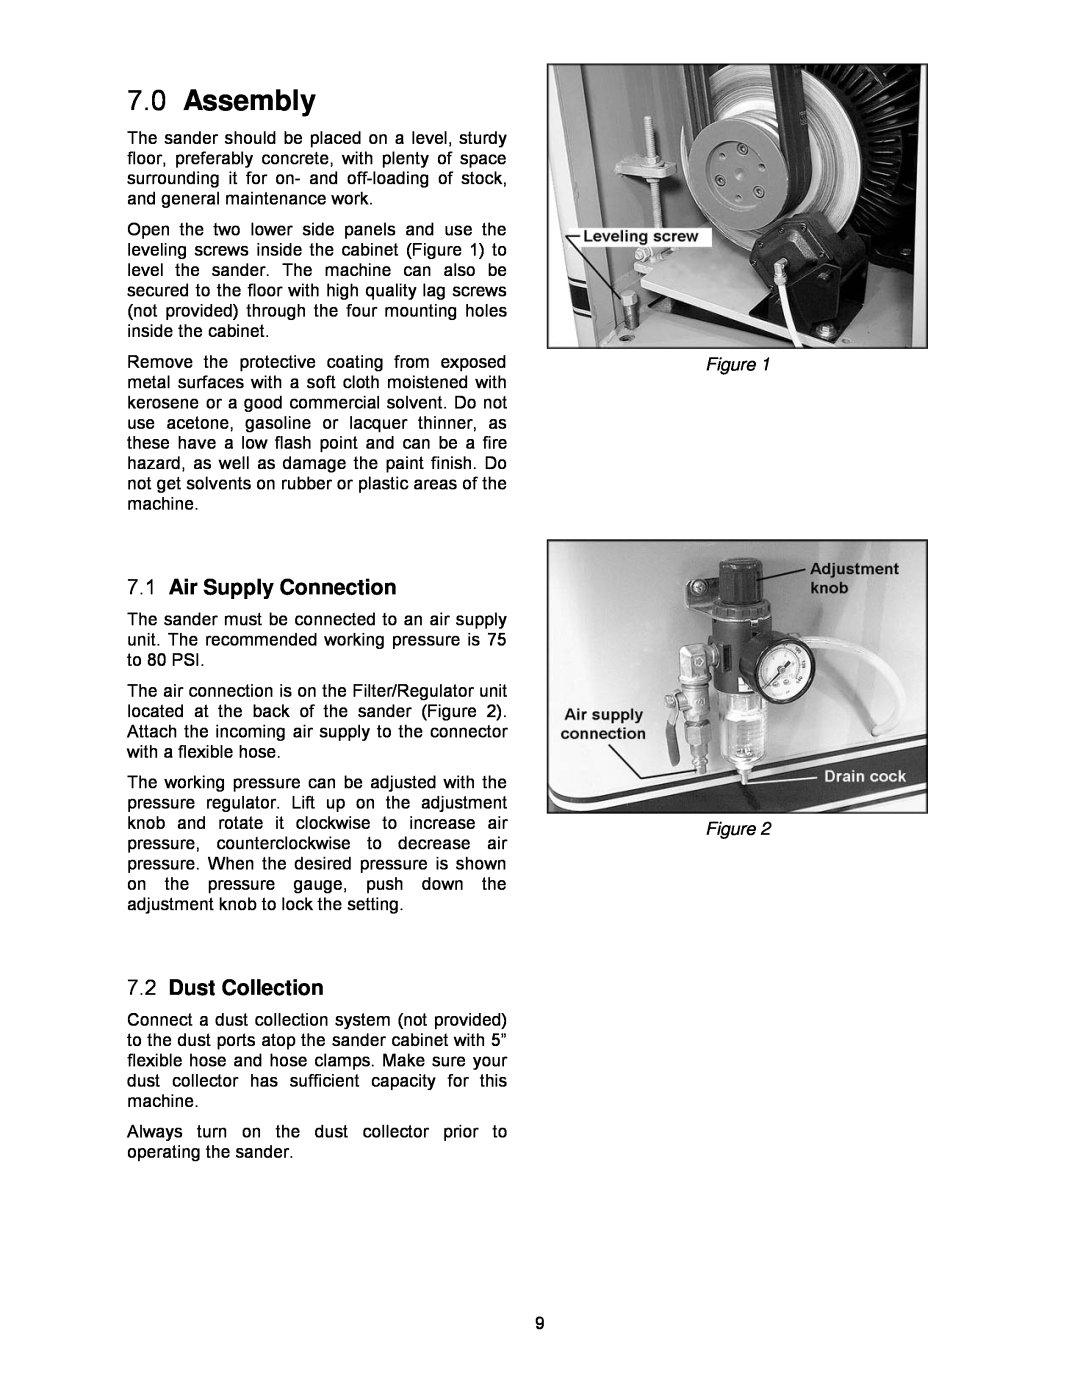 Powermatic WB-37, WB-25, WB-43 operating instructions Assembly, Air Supply Connection, Dust Collection 